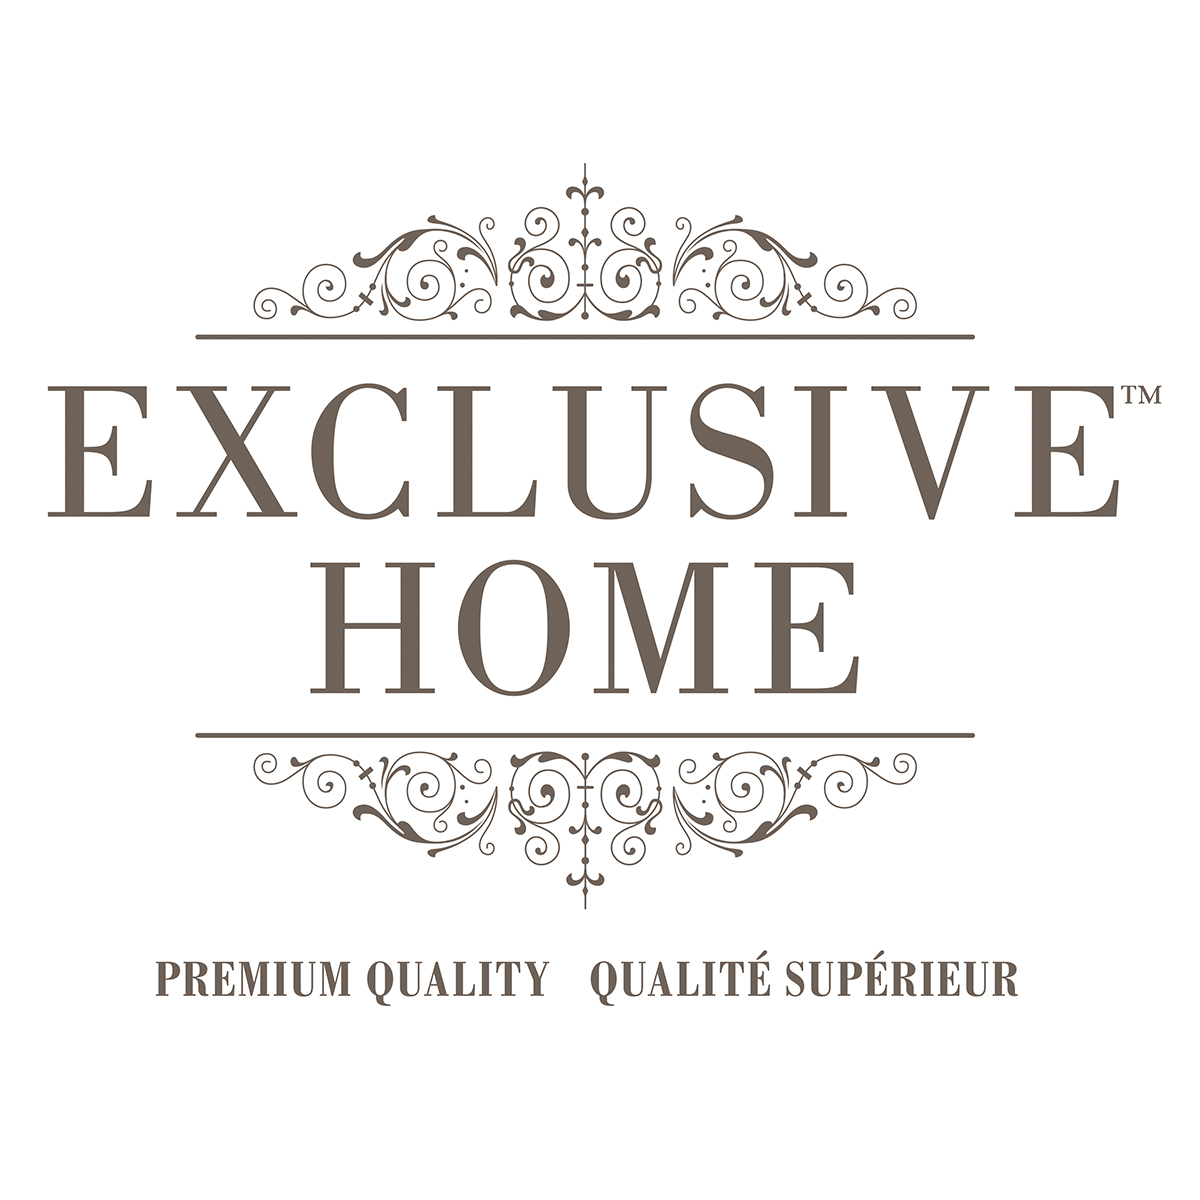 EXCLUSIVE HOME